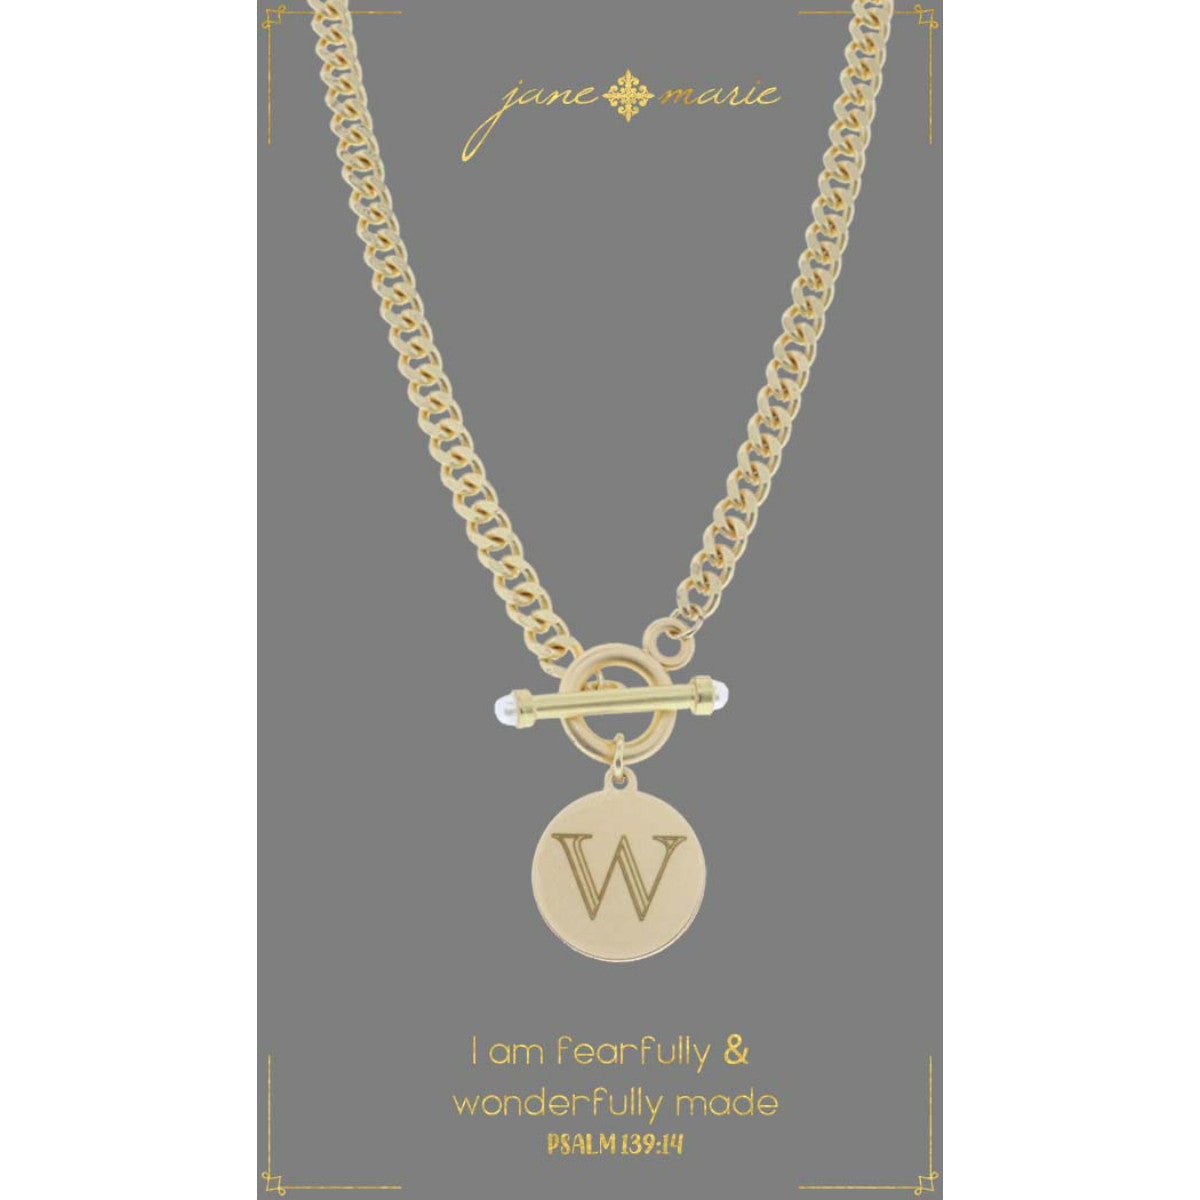 "w" stamped letter necklace on a gray display card on a white background